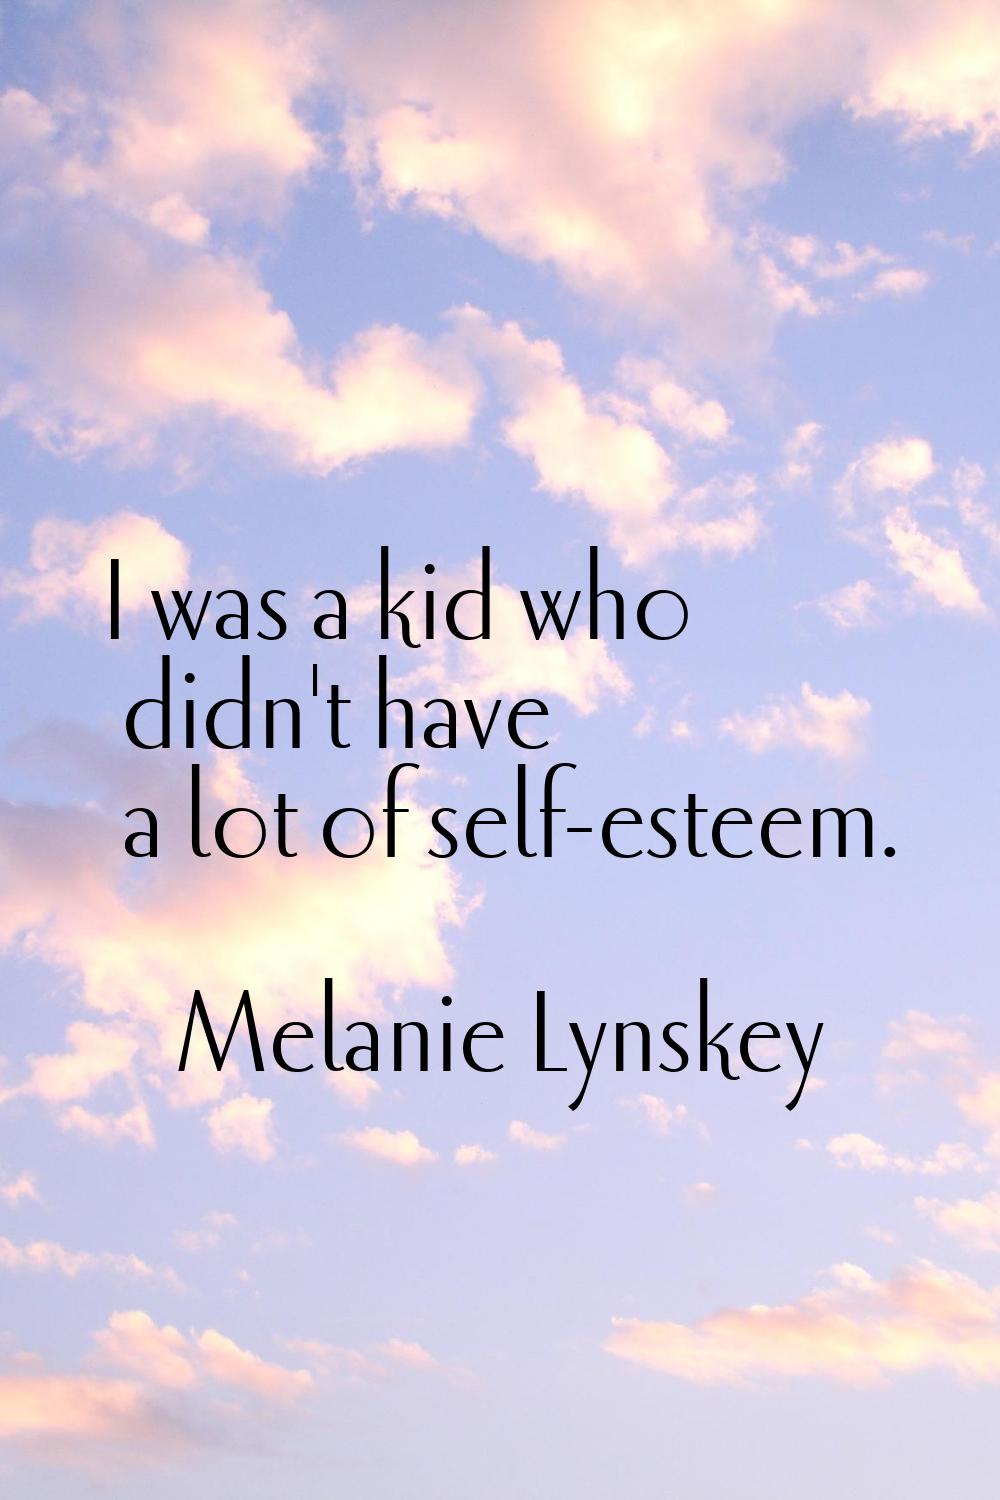 I was a kid who didn't have a lot of self-esteem.